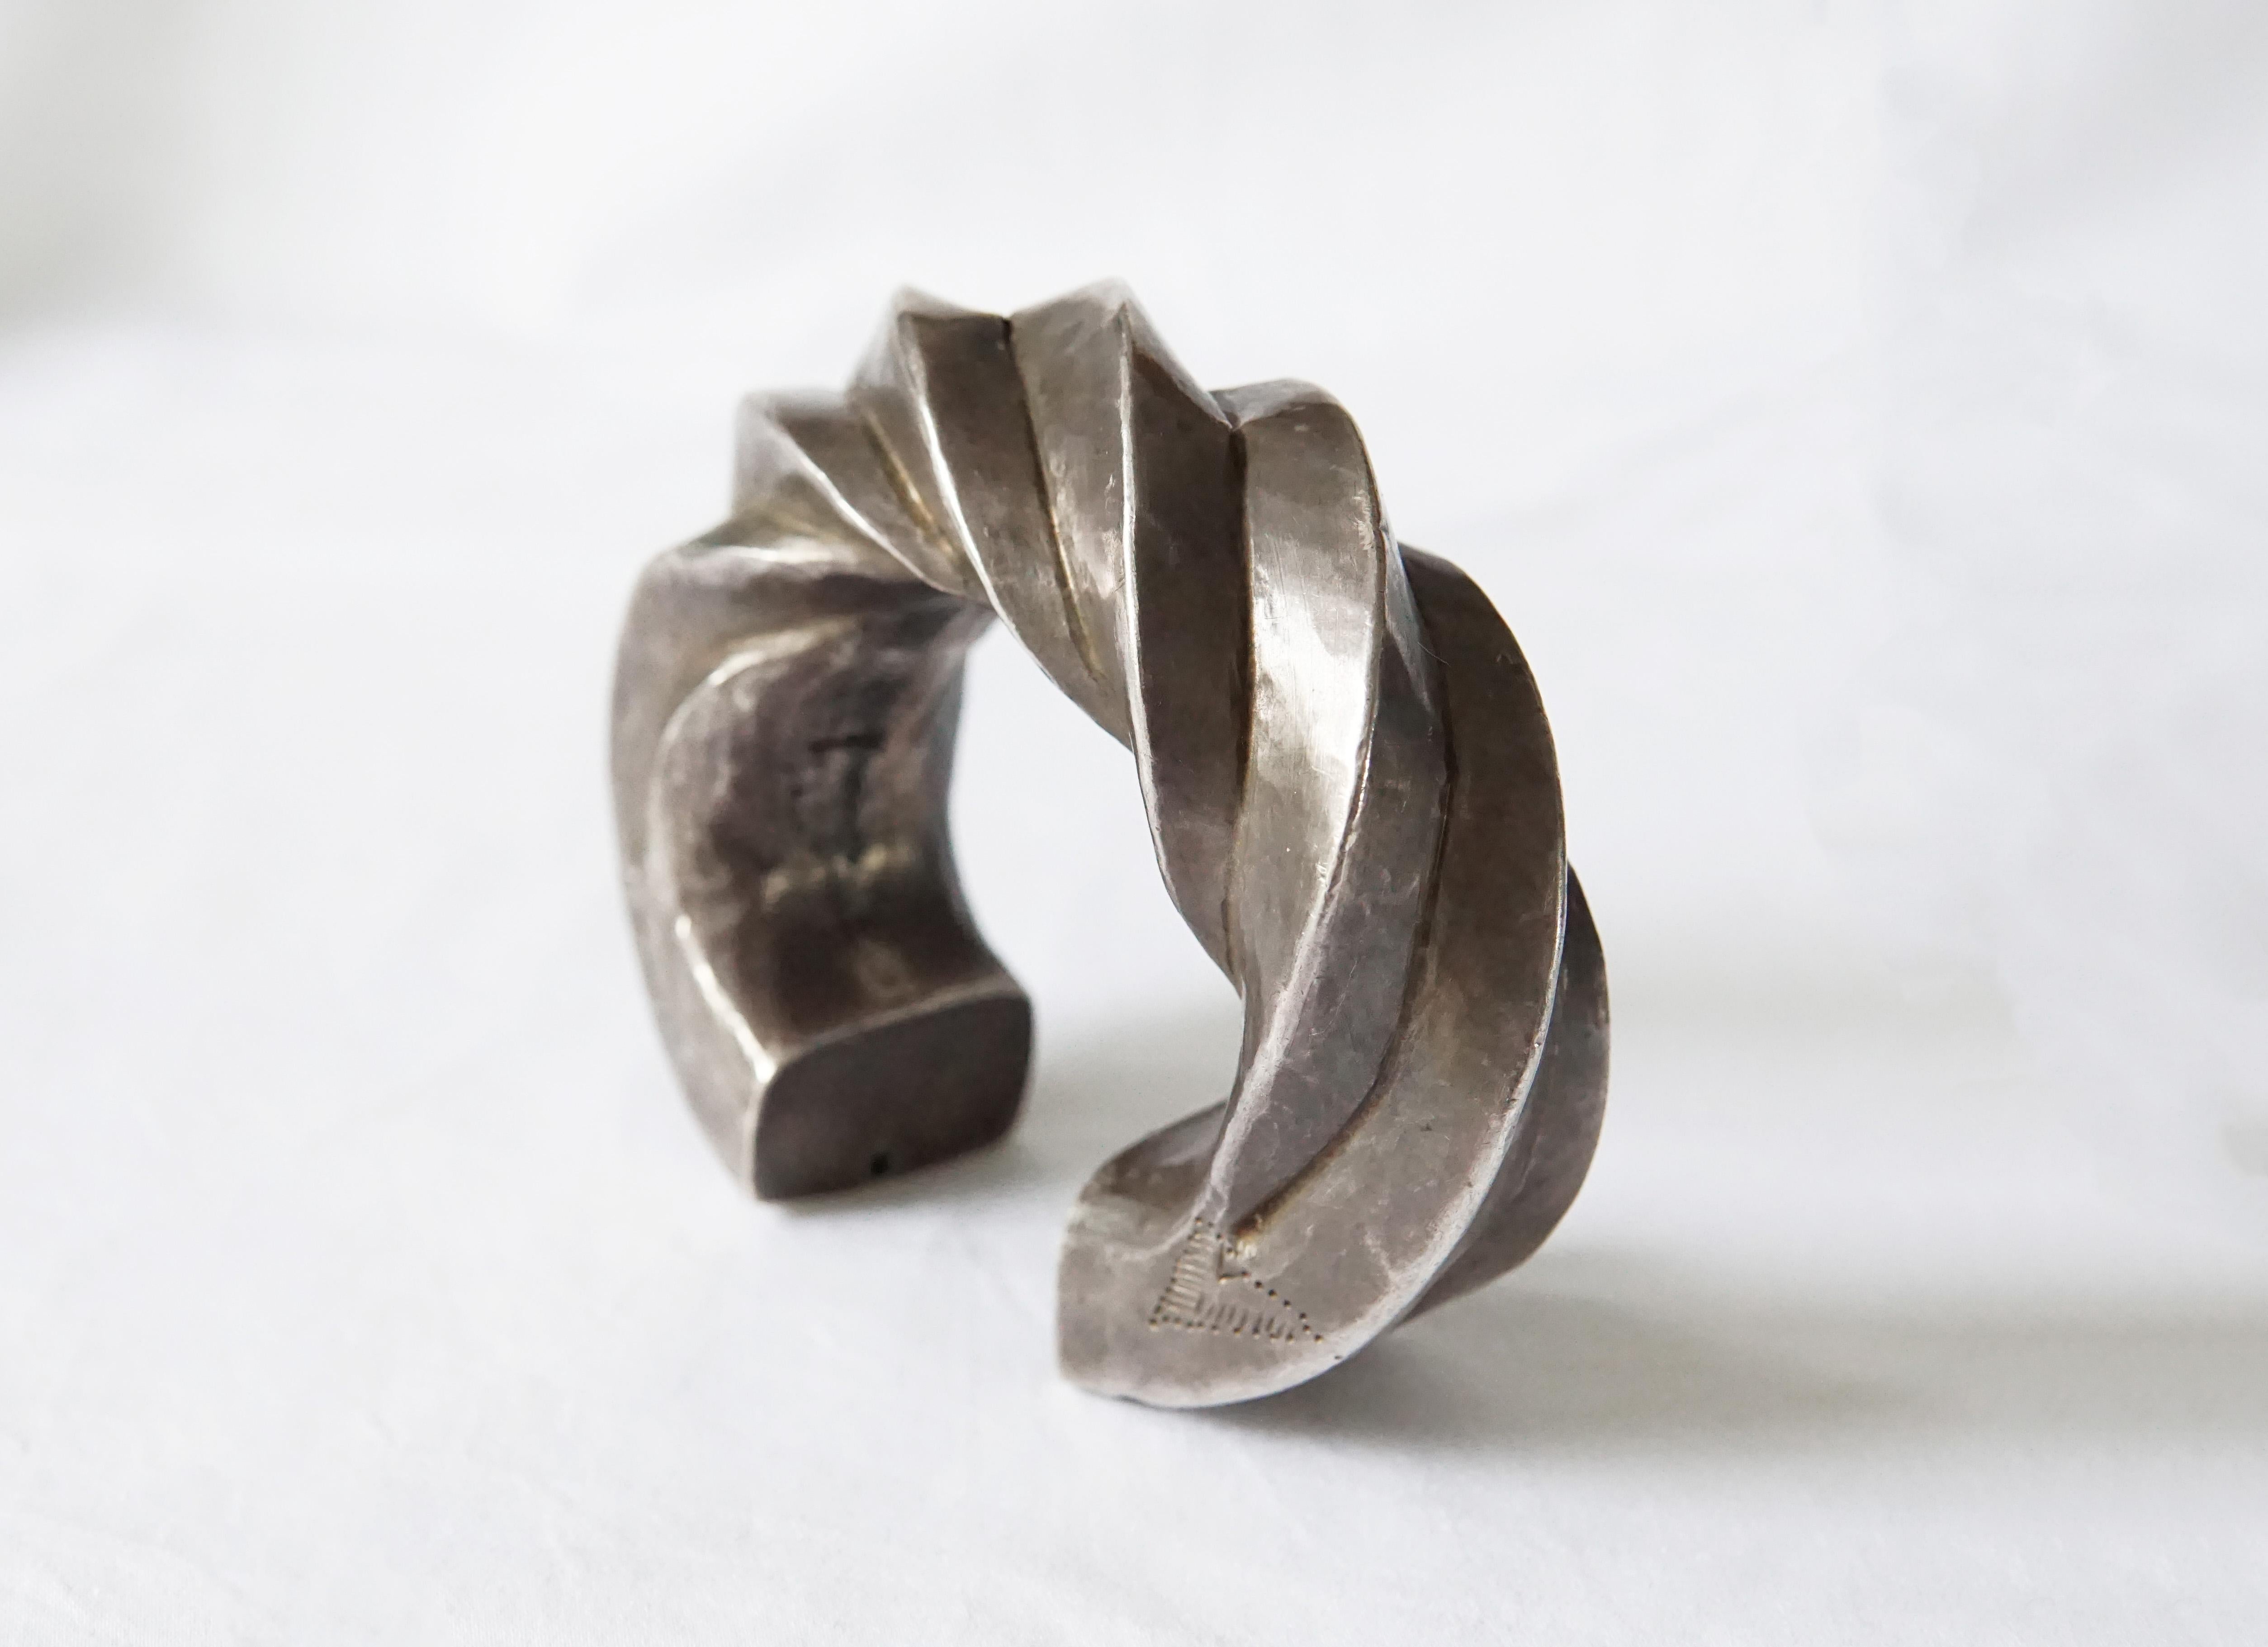 This unique tribal cuff bracelet originates from the Karen Hill Tribe of Northern Thailand via tribal silversmith techniques that have been handed down through generations. There are subtle hand stamped tribal patterns on both sides and both ends.